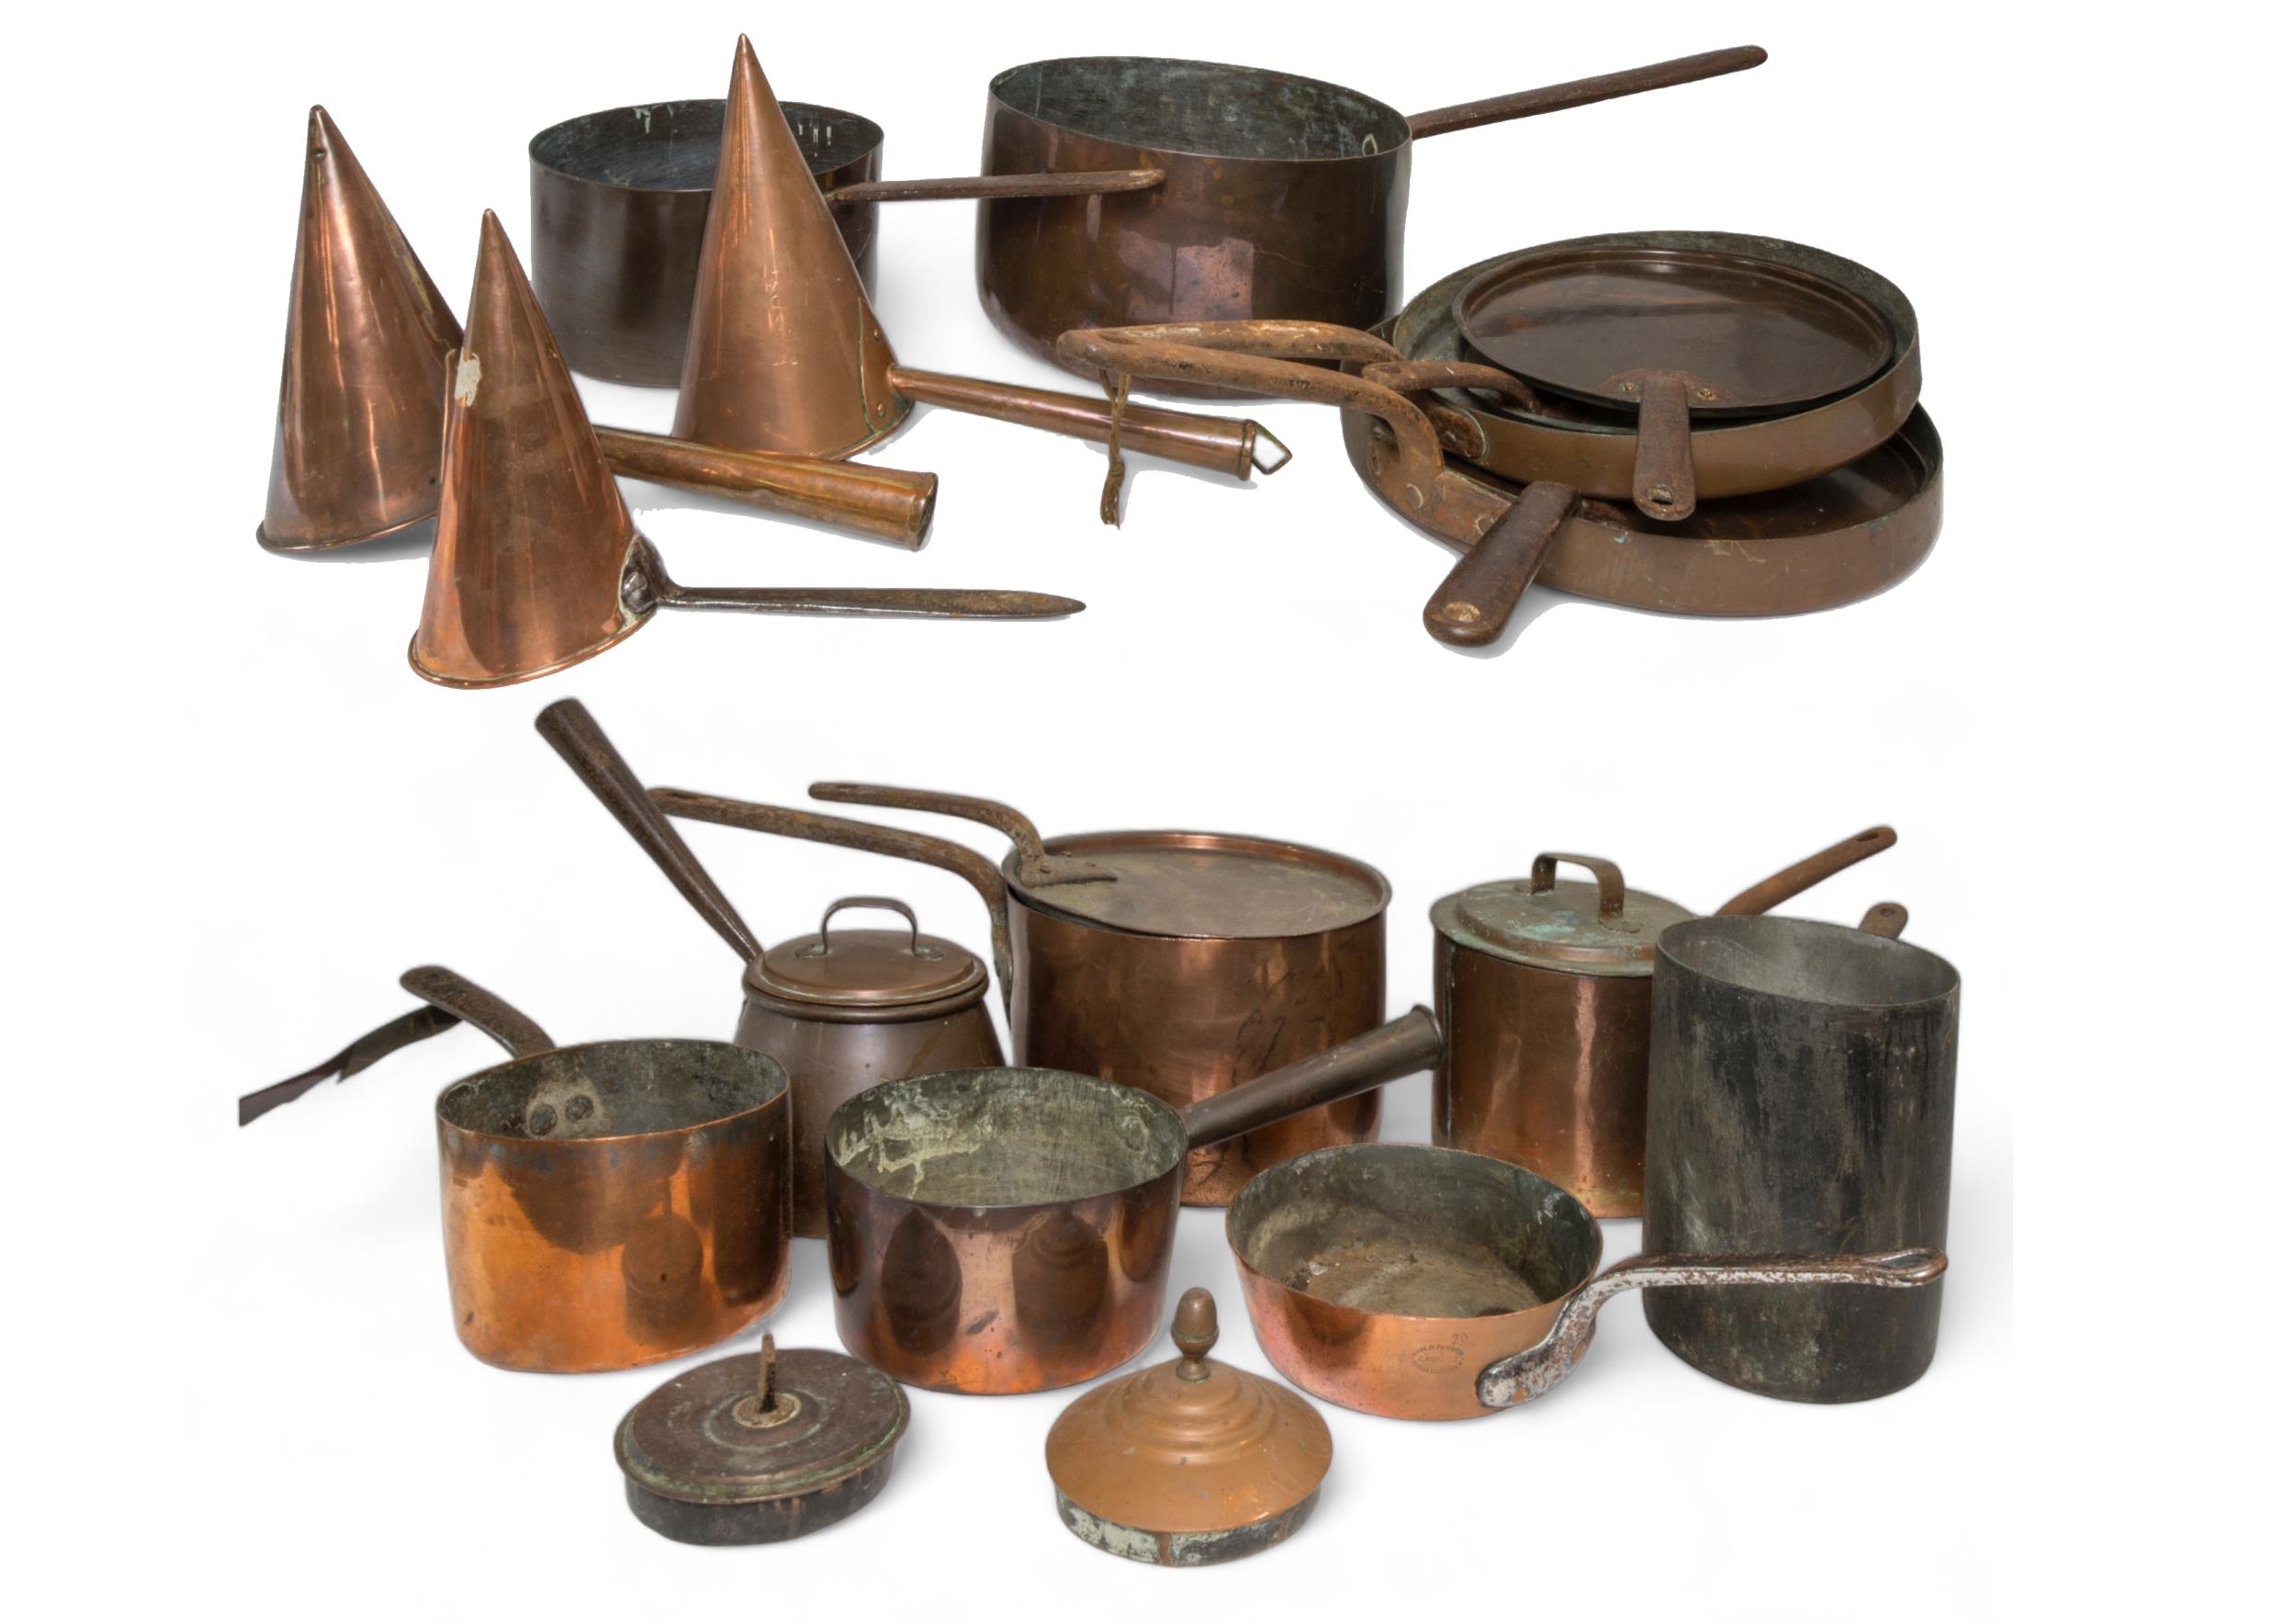 A LARGE VICTORIAN COPPER PAN WITH LID AND A SELECTION OF VICTORIAN AND LATER COPPER PANS AND